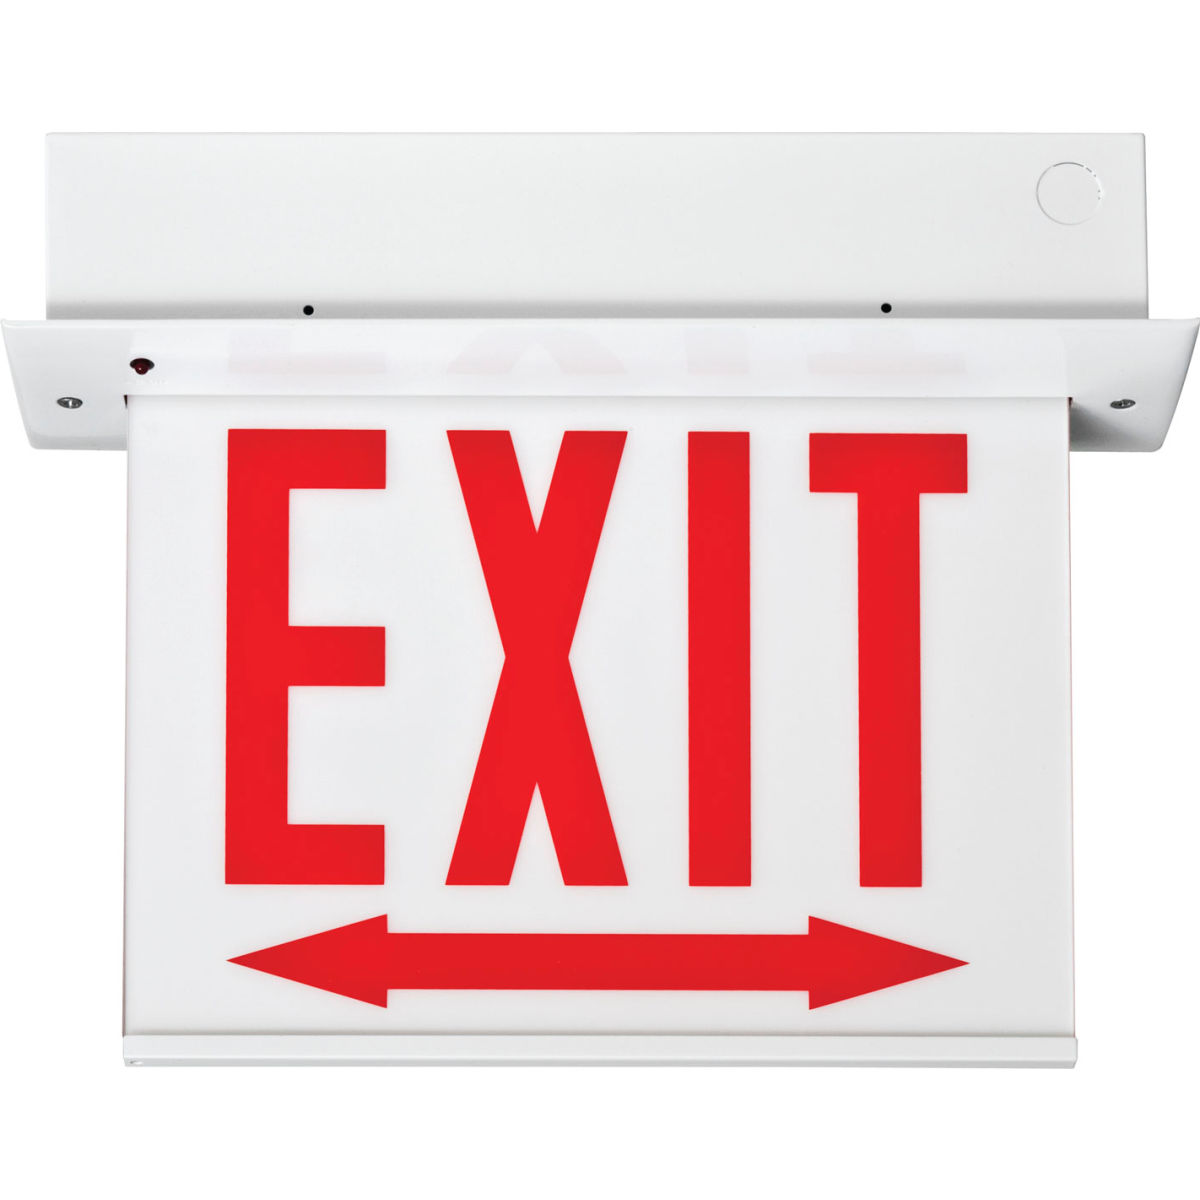 Picture of Acuity Brands B2085129 Lithonia Lighting EDGR 1 R EL M4 - LED Edge-Lit Exit Sign - Red